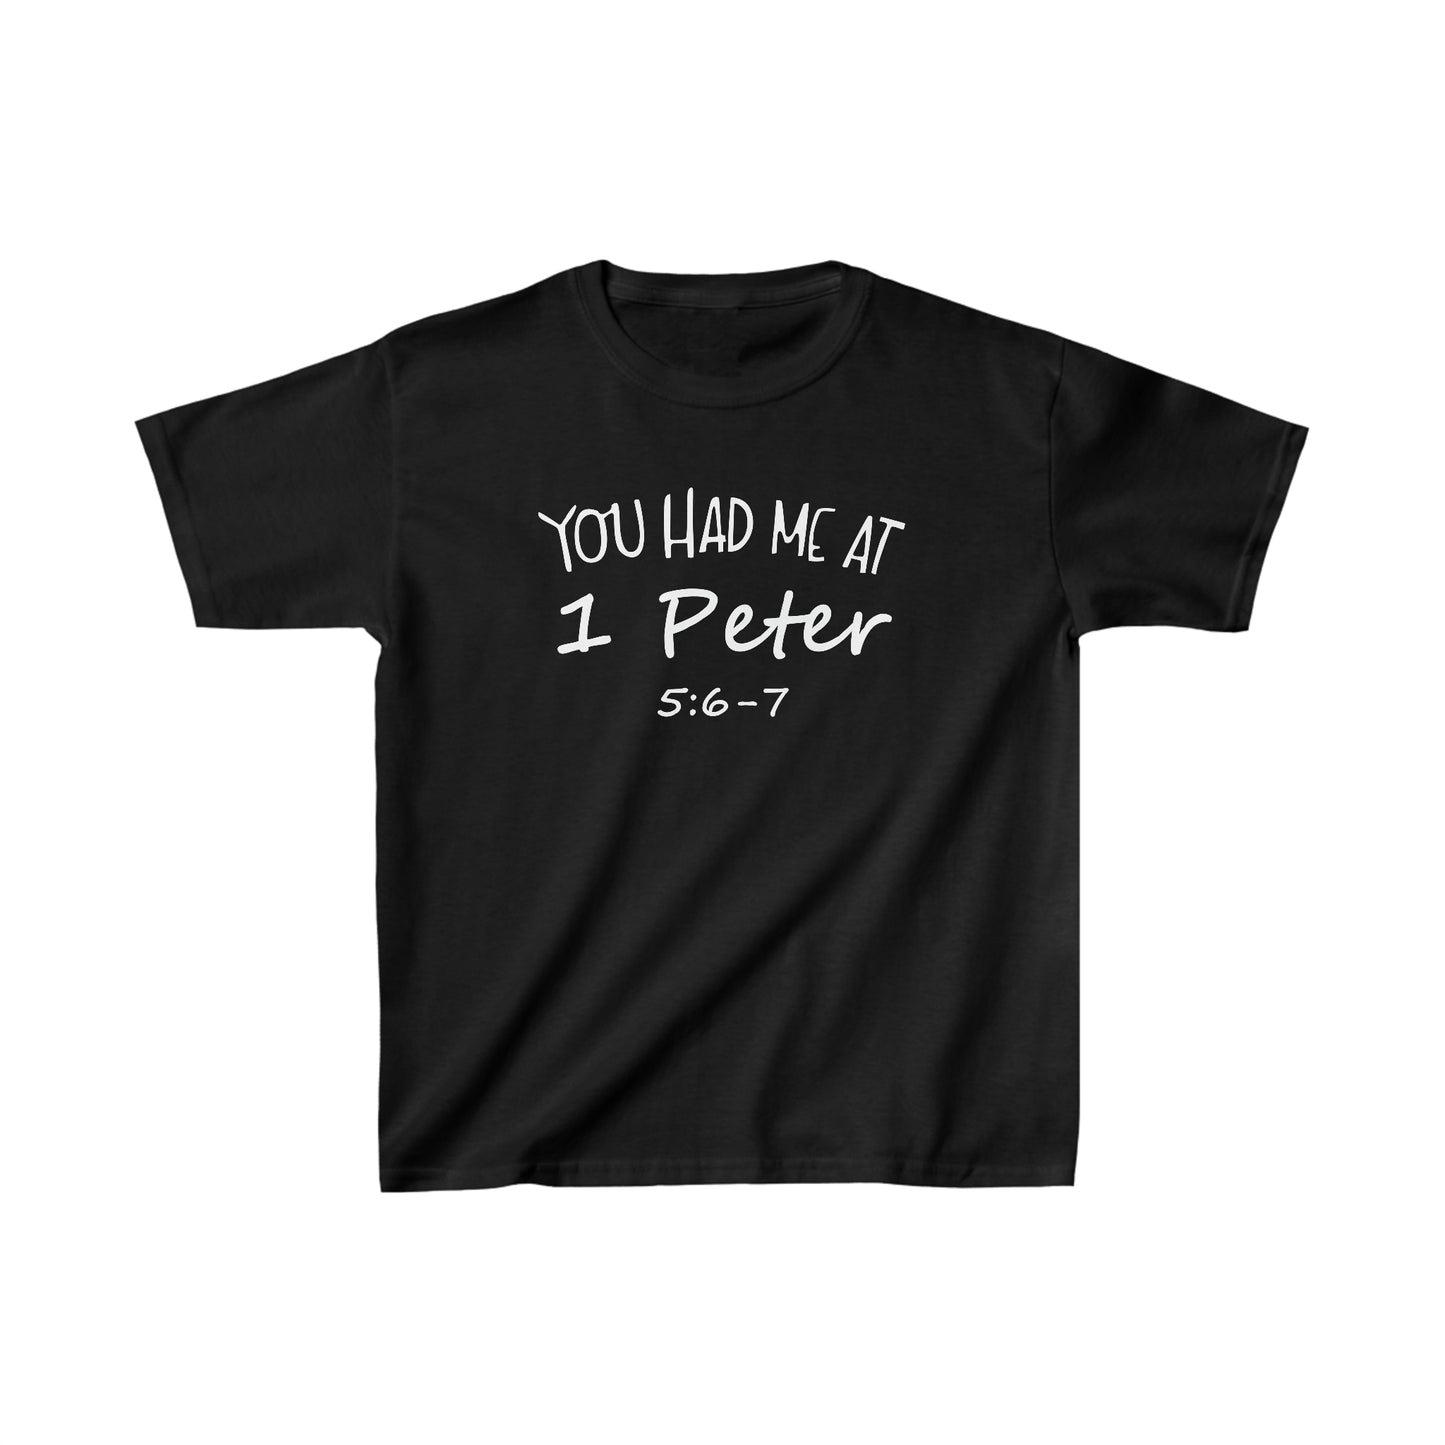 You Had Me At 1 Peter 5:6-7 Youth T-Shirt